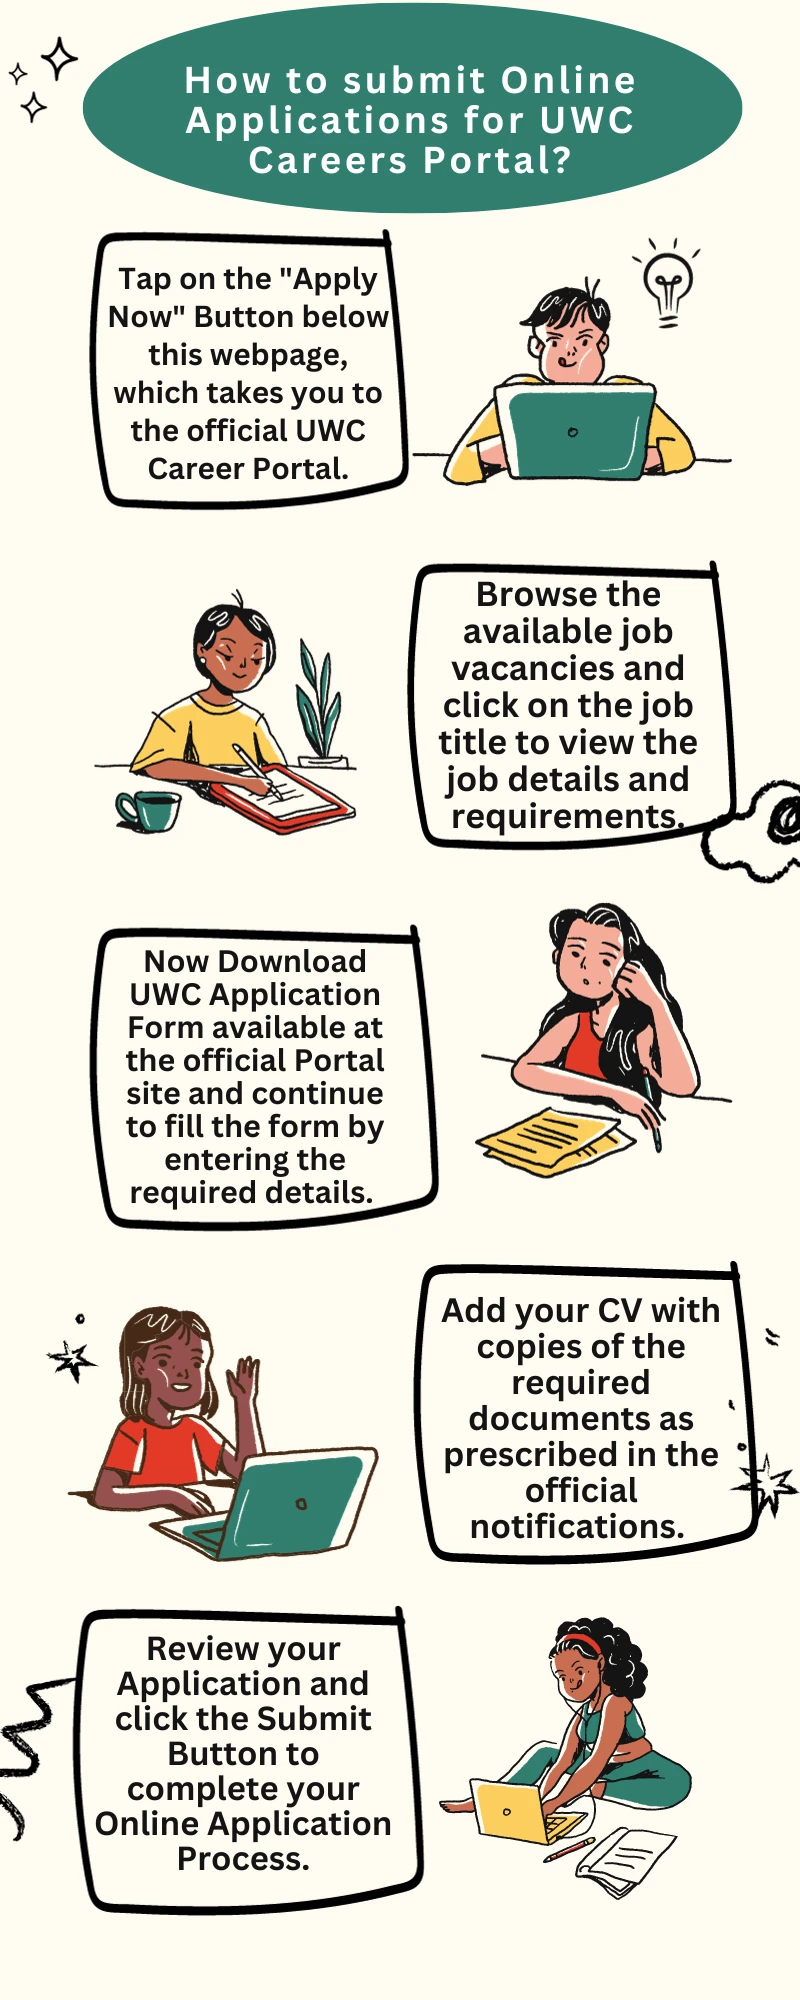 How to submit Online Applications for UWC Careers Portal?